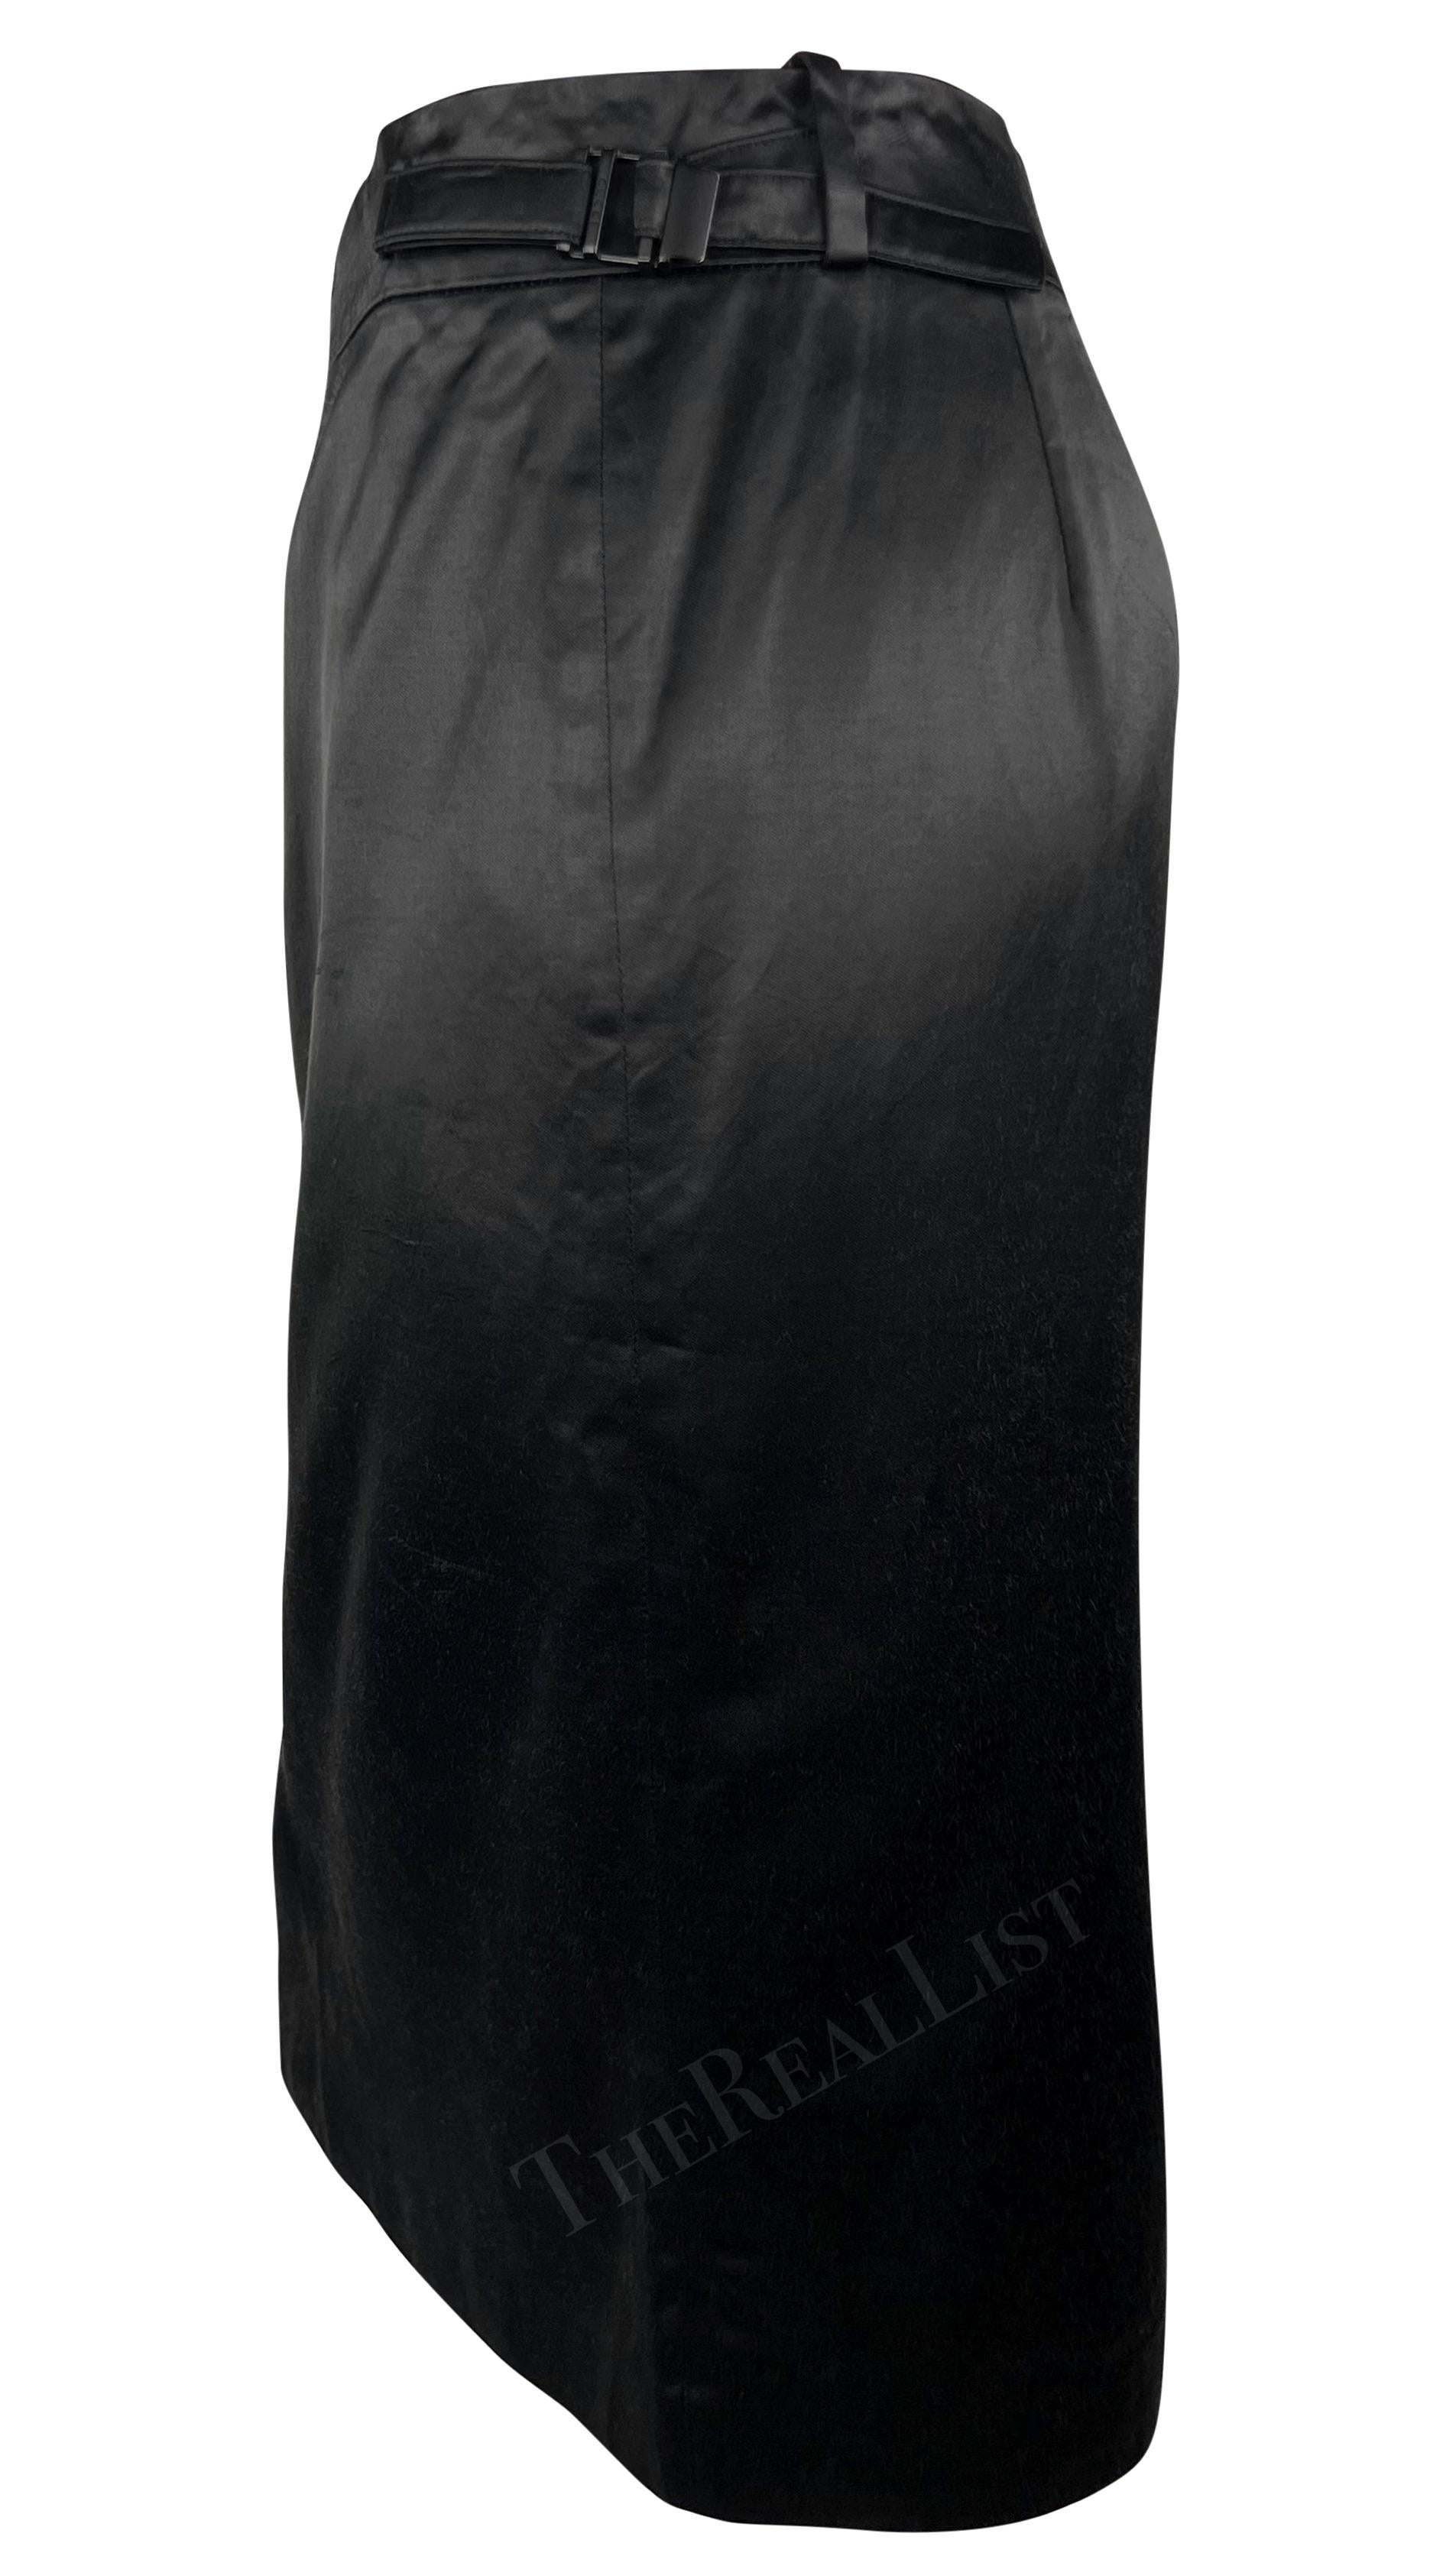 S/S 2001 Gucci by Tom Ford Black Satin Belted Runway Pencil Skirt  In Excellent Condition For Sale In West Hollywood, CA